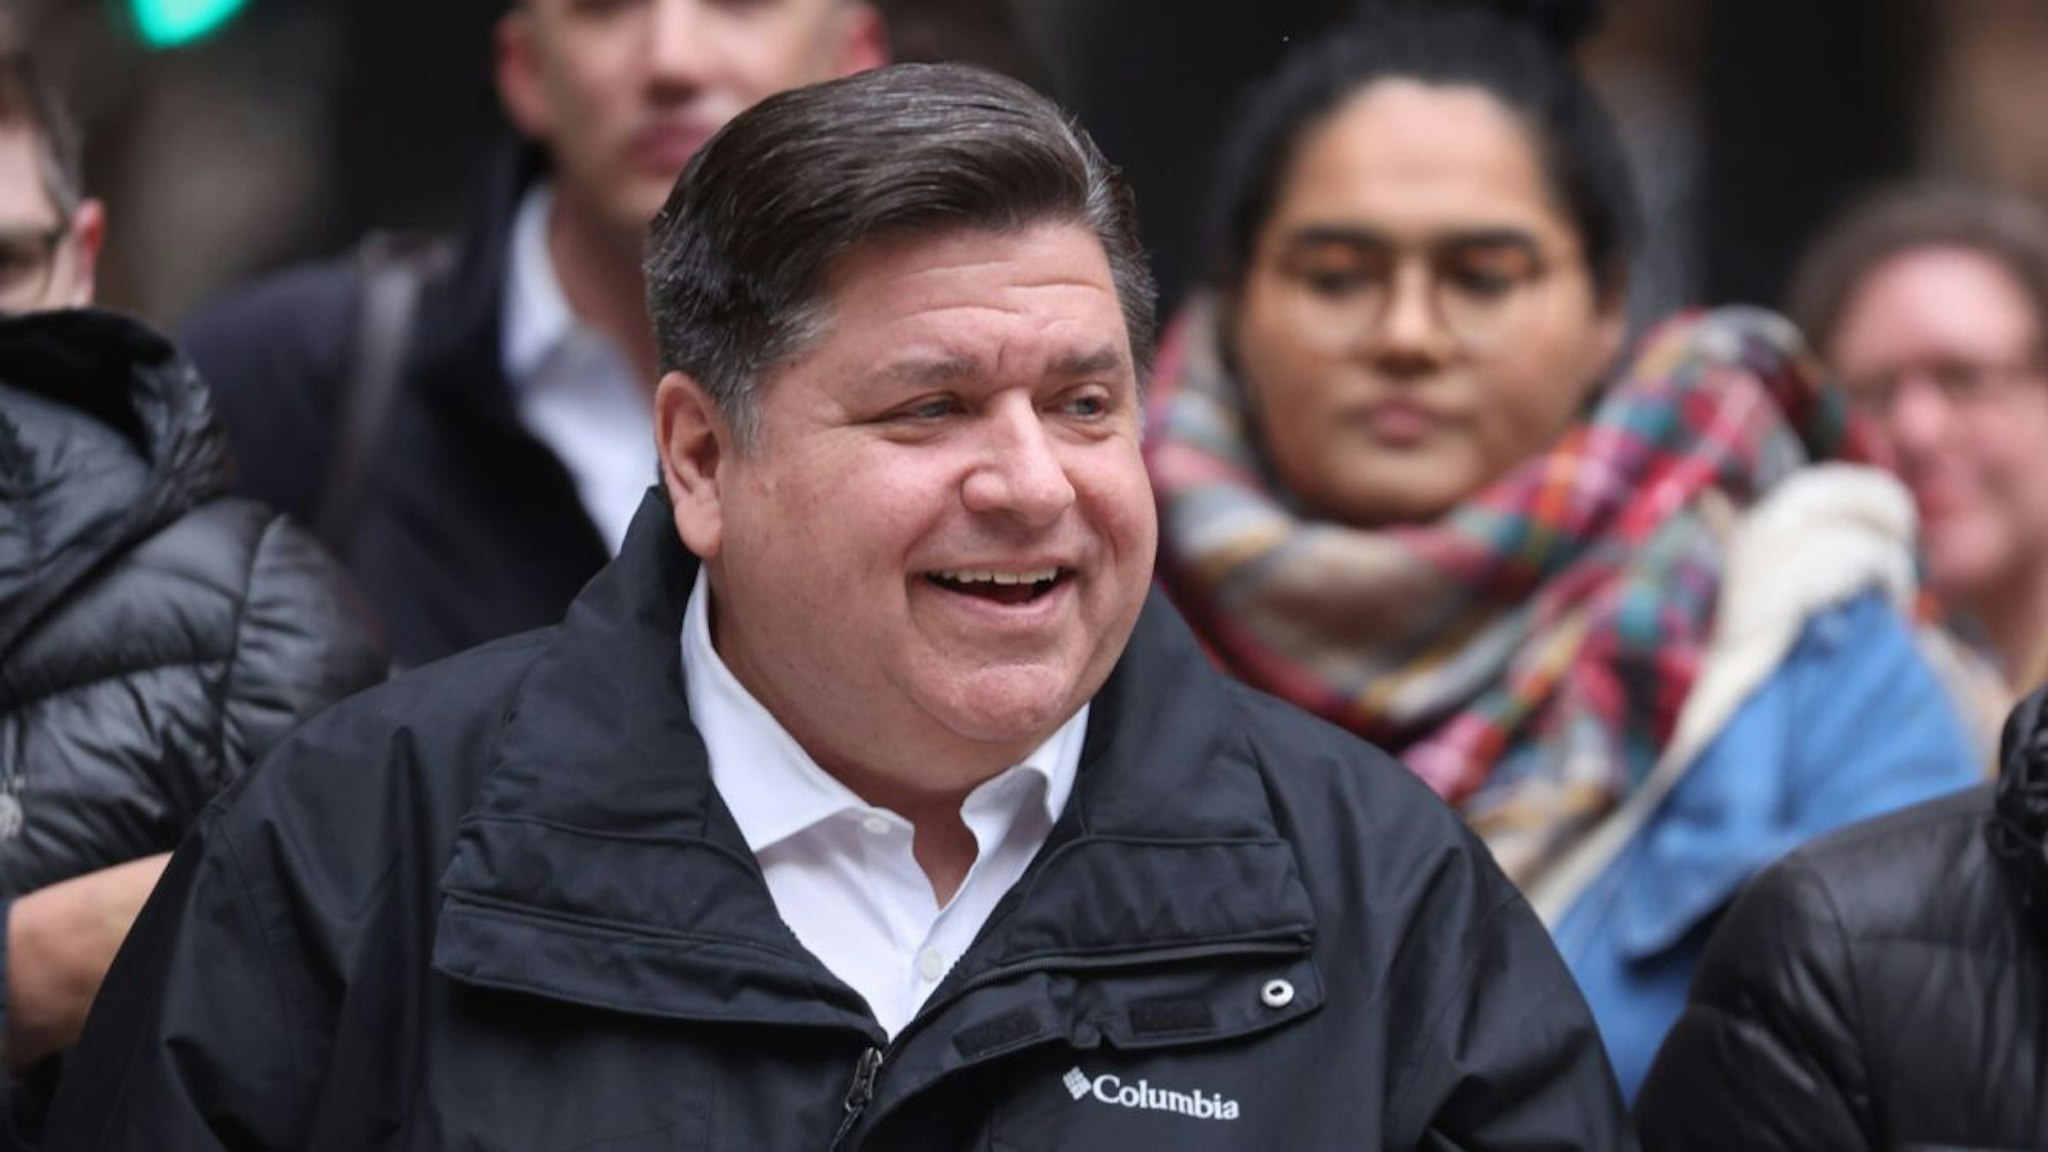 Illinois Gov. J.B. Pritzker listens to speakers during a transgender support rally at Federal Building Plaza on April 27, 2022 in Chicago, Illinois.